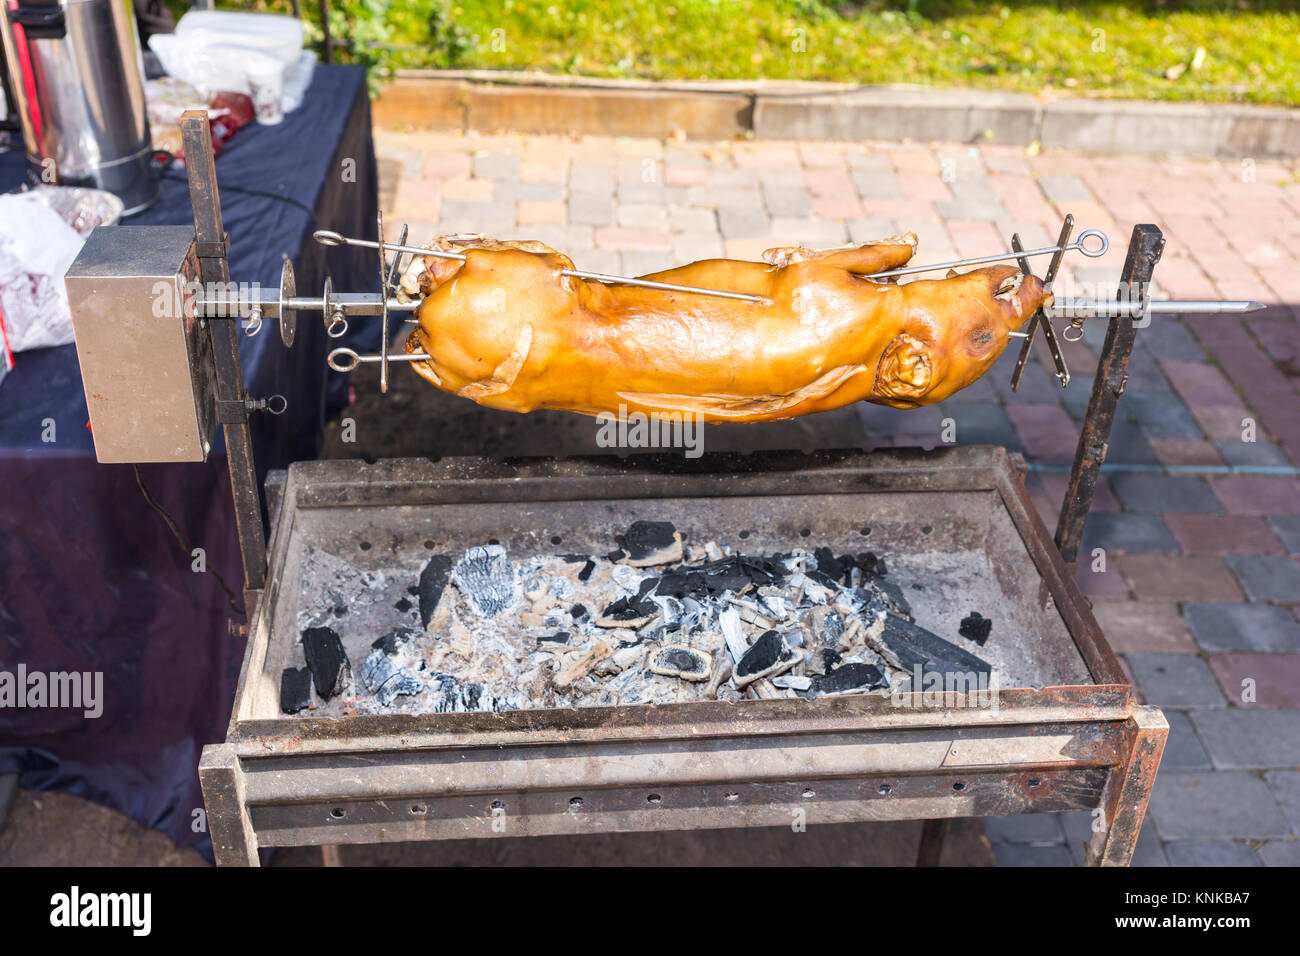 Roasted pig on a traditional spit outdoor. Food and beverages concept Stock Photo